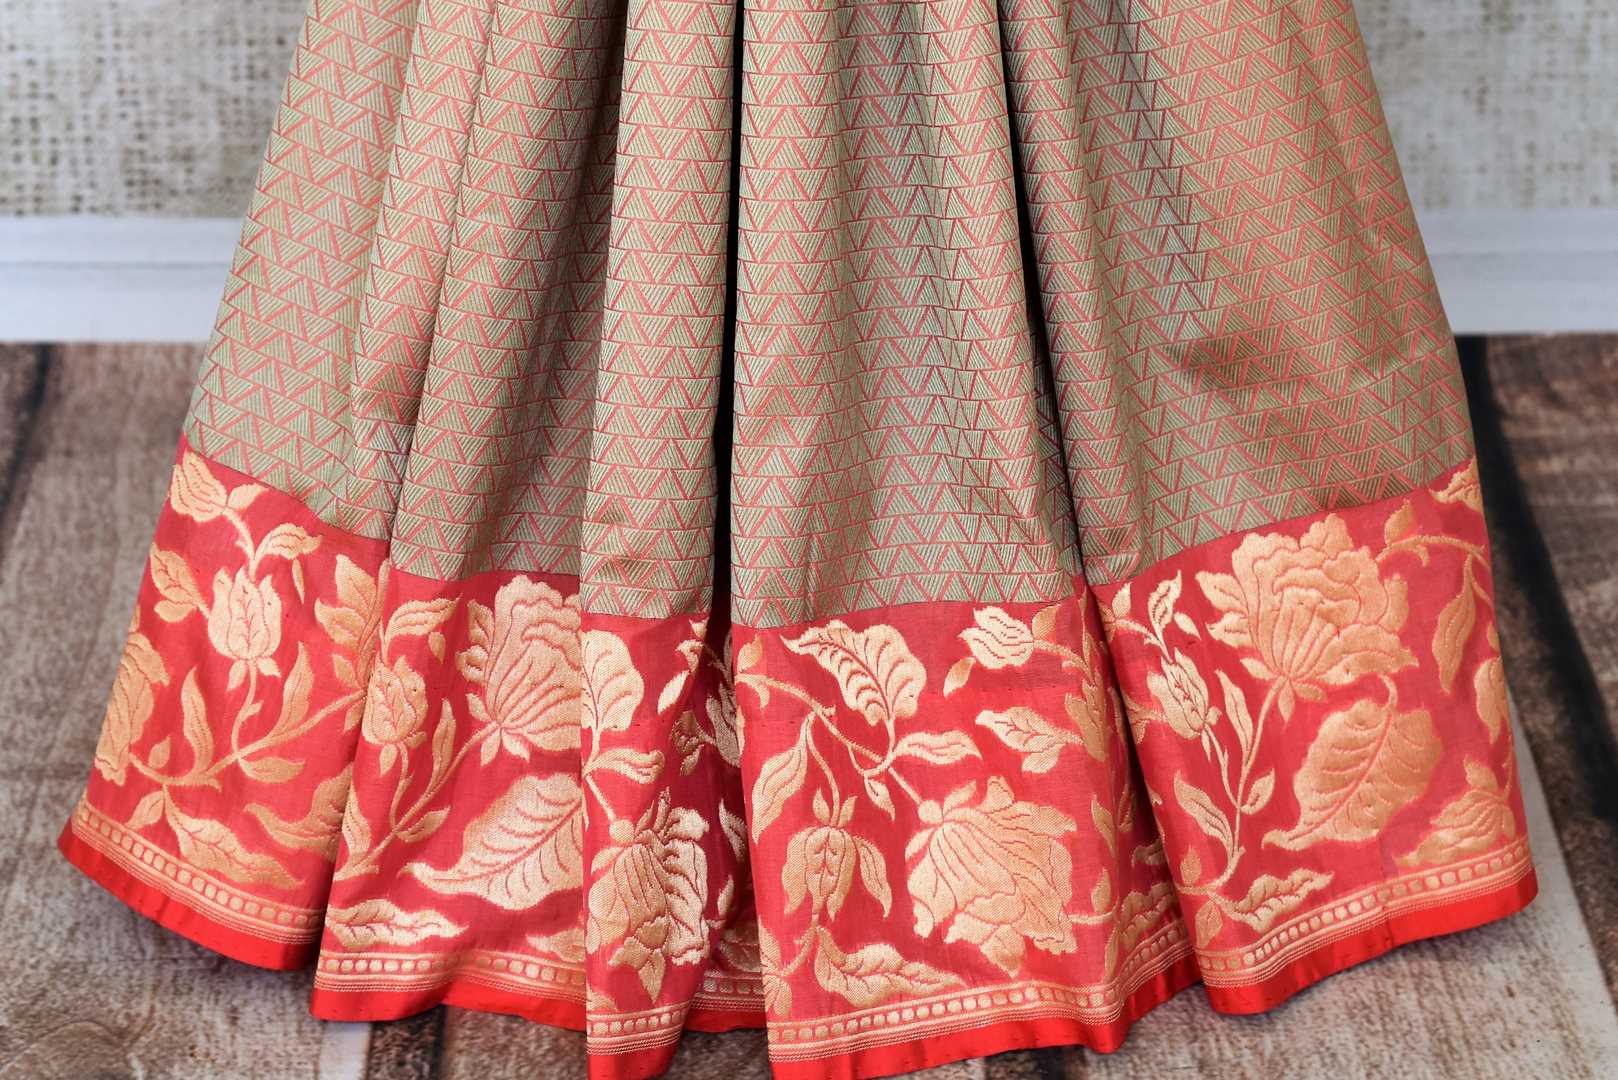 Endeavour into the enticing journey of beauty as you drape this cream floral embroidered banarsi silk saree. Style this sari with a graceful red and gold embroidered blouse as the intricate floral work steals the show. Shop designer sarees, embroidered saris, ikkat sarees online or visit Pure Elegance store, USA. -pleats